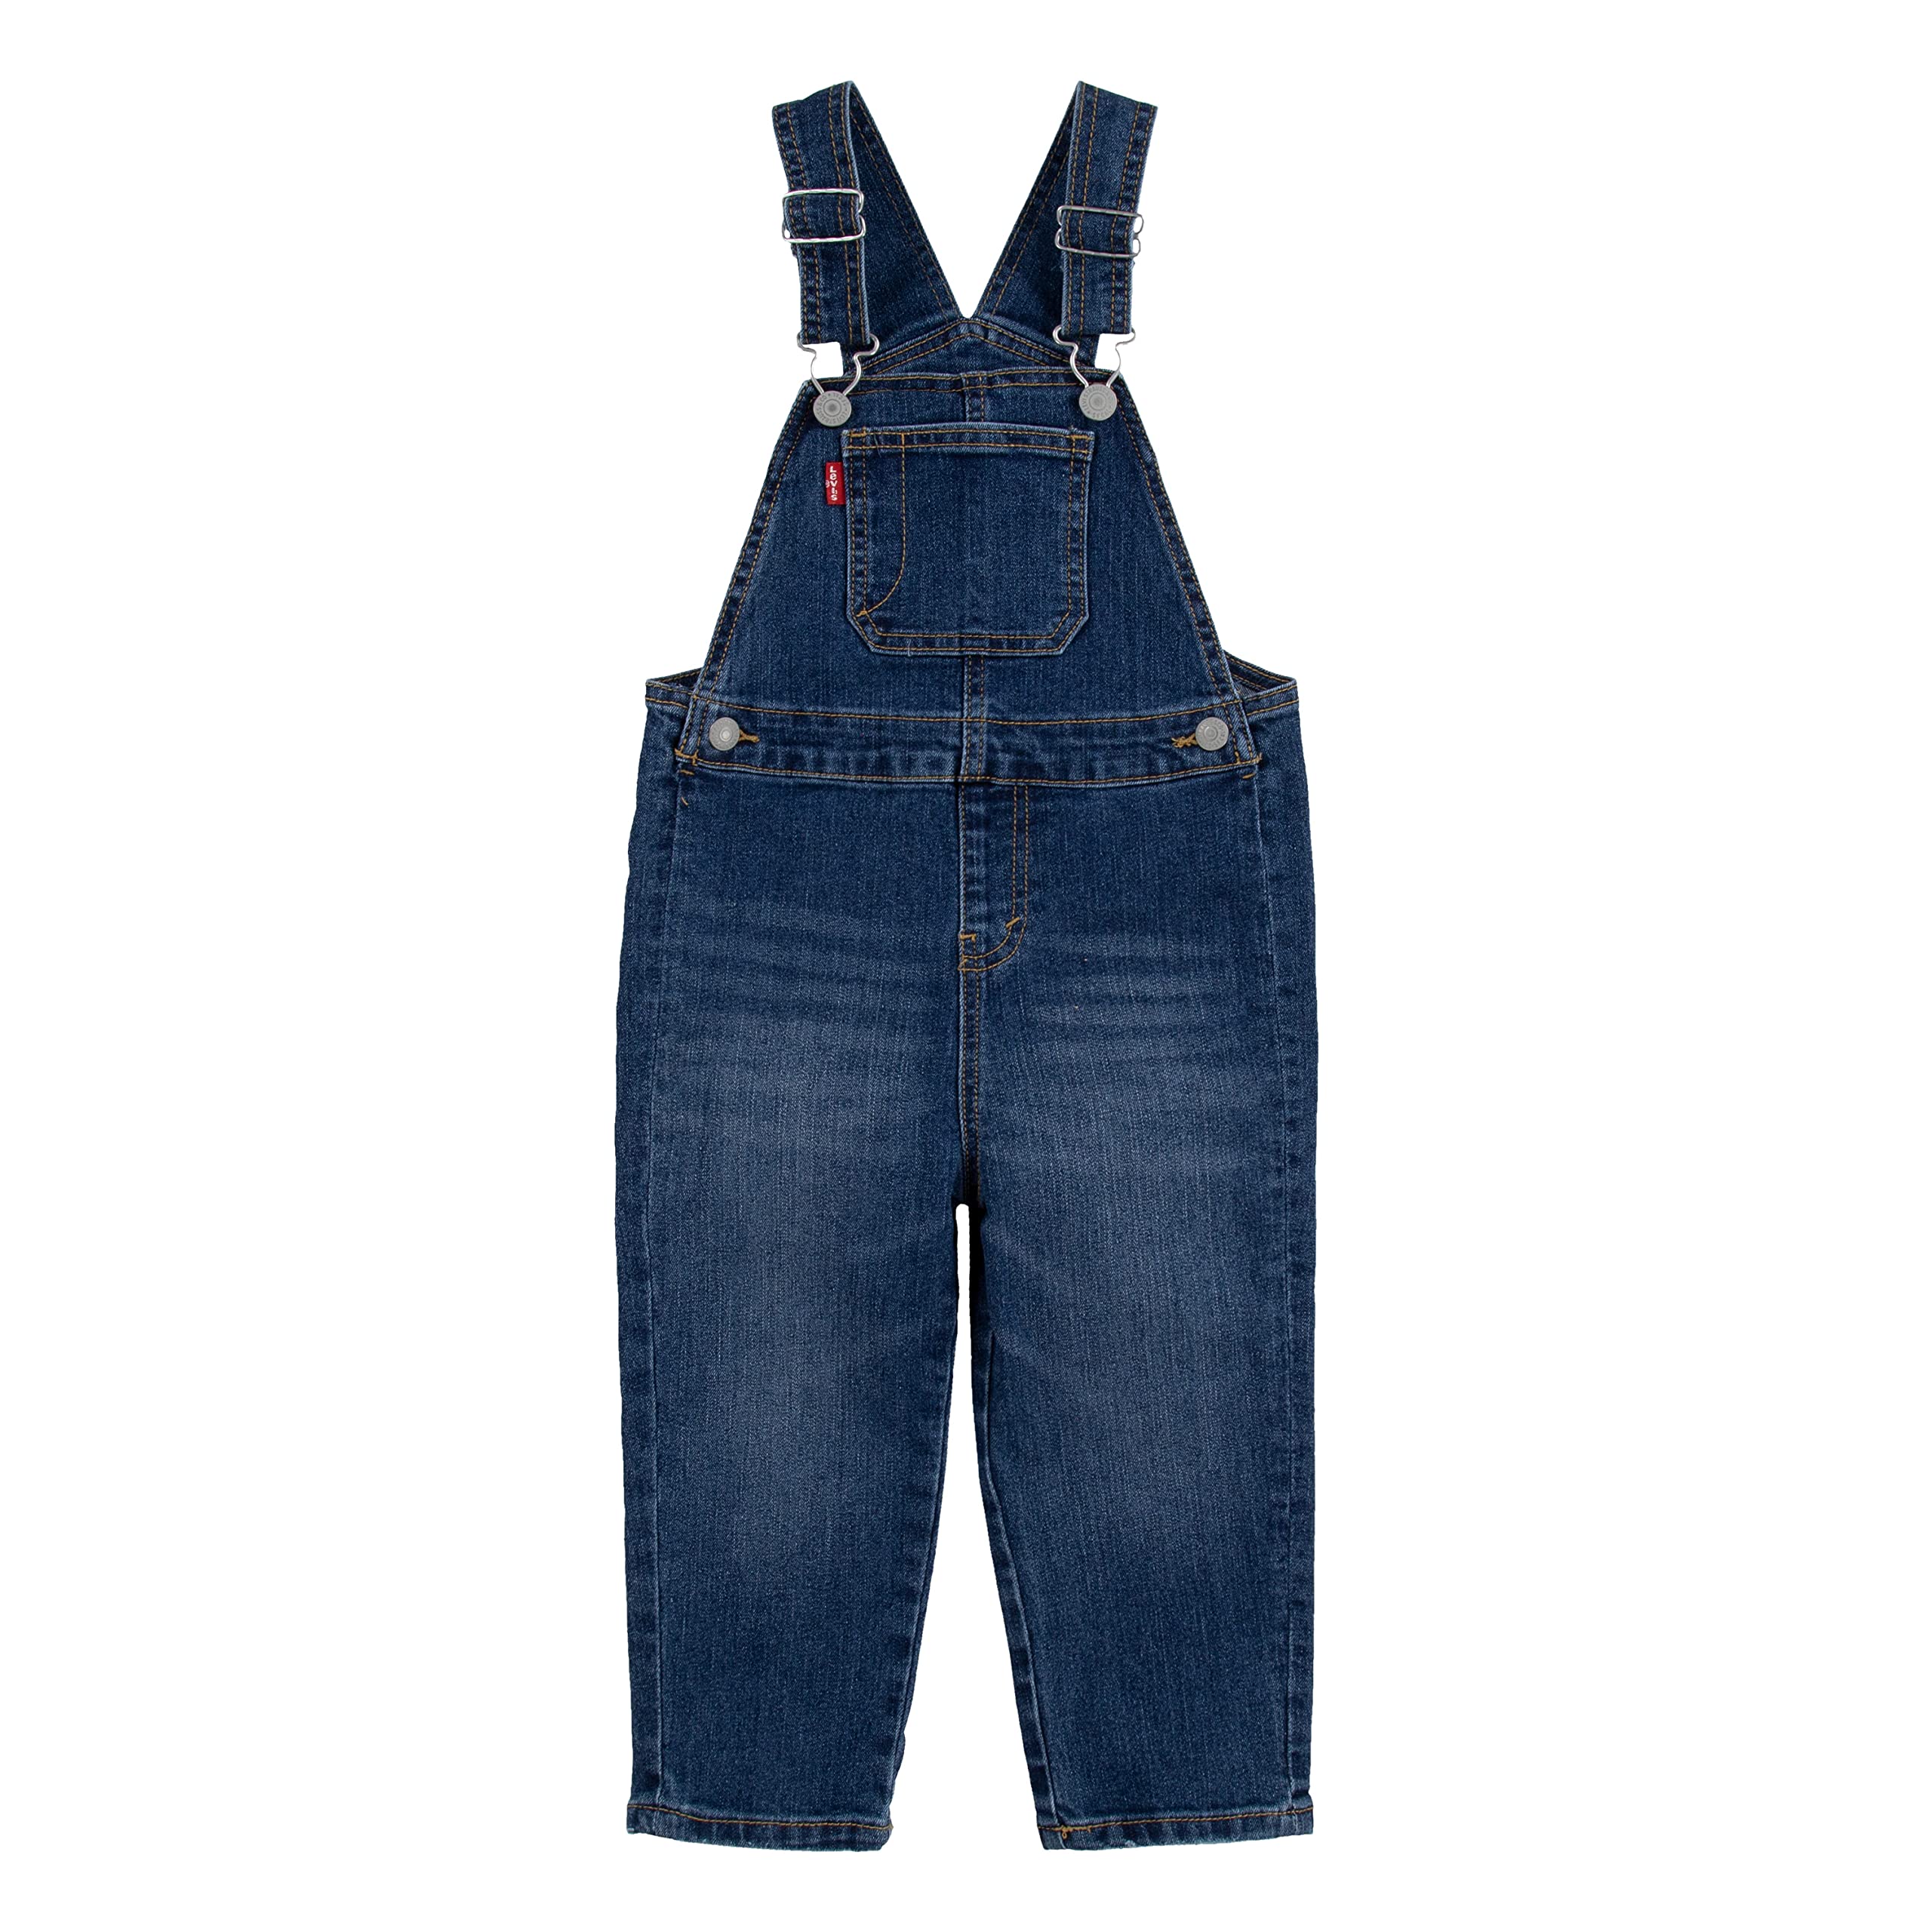 Levi's Baby & Toddler Boys' Denim Overalls $11.50 + Free Shipping w/ Prime or on $35+